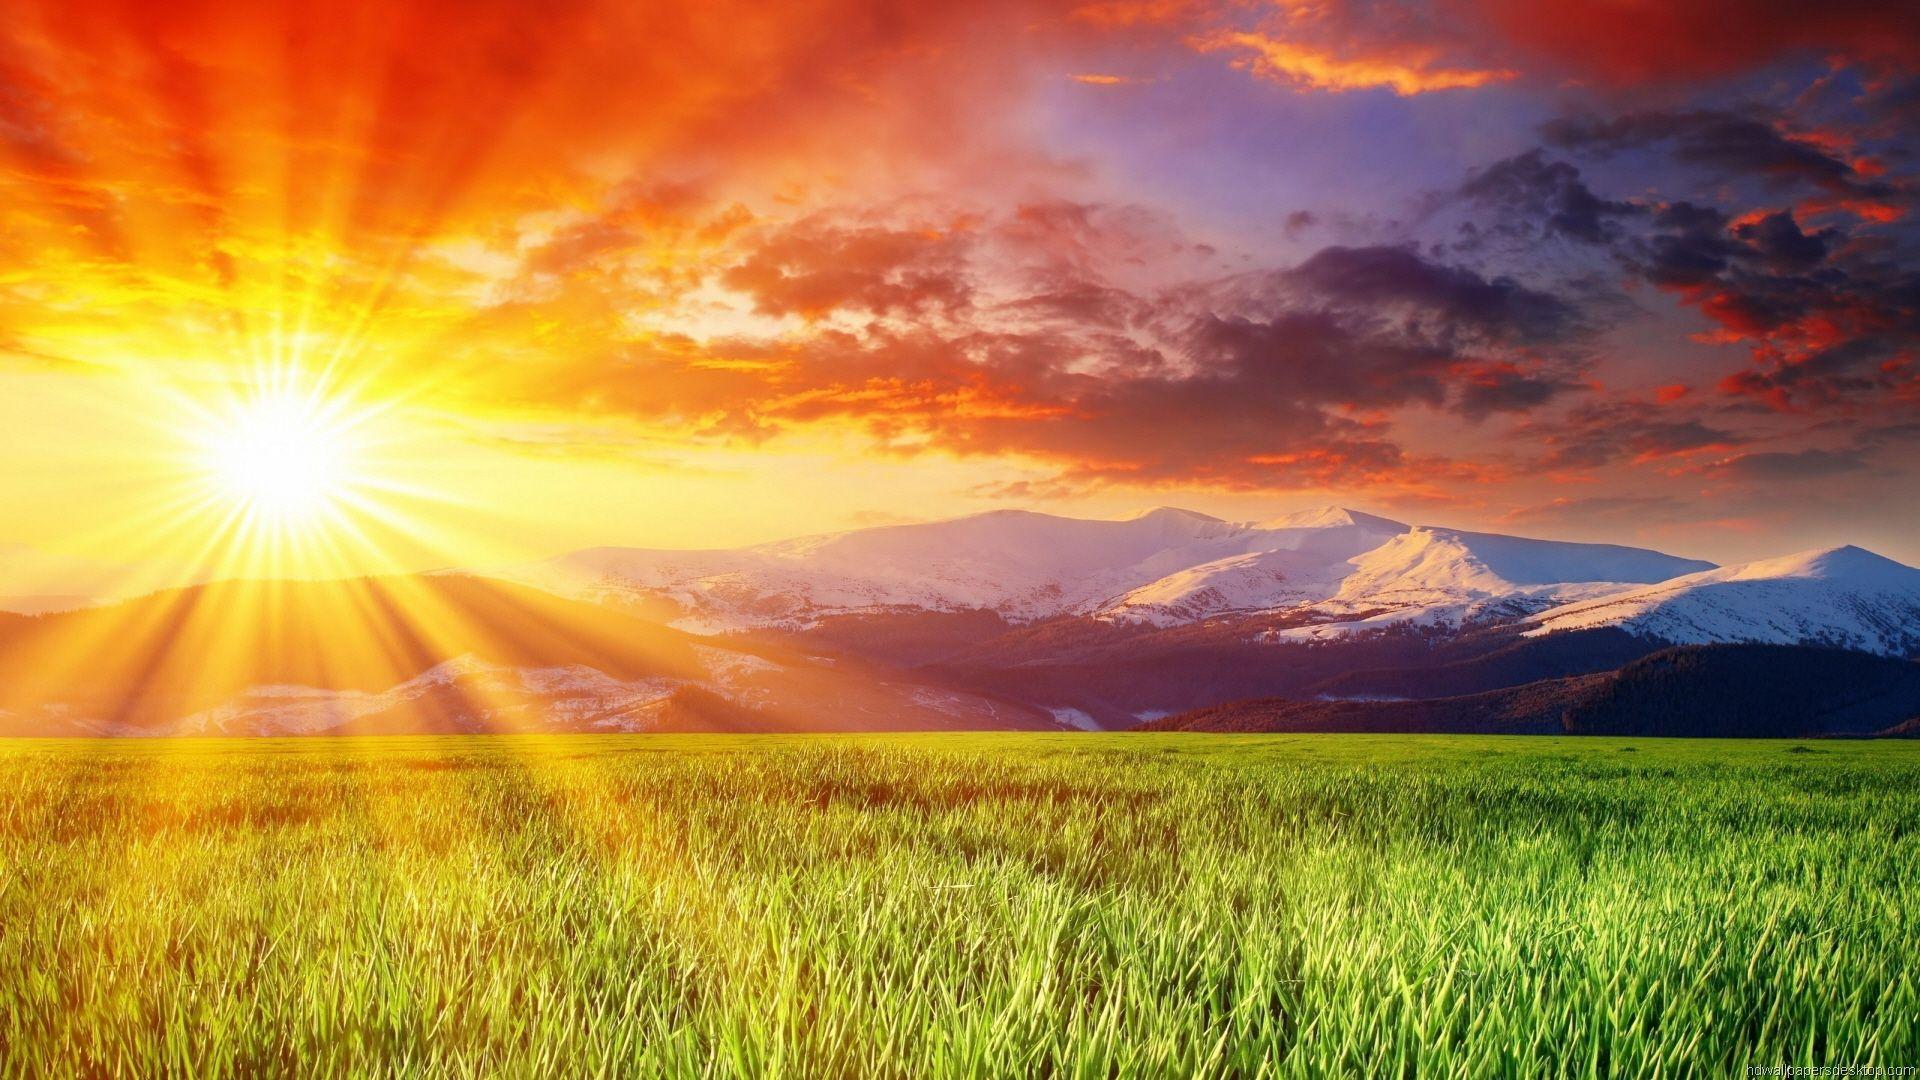 Nature HD wallpaper: Shining Sun Skies. Collection 1 in 2019